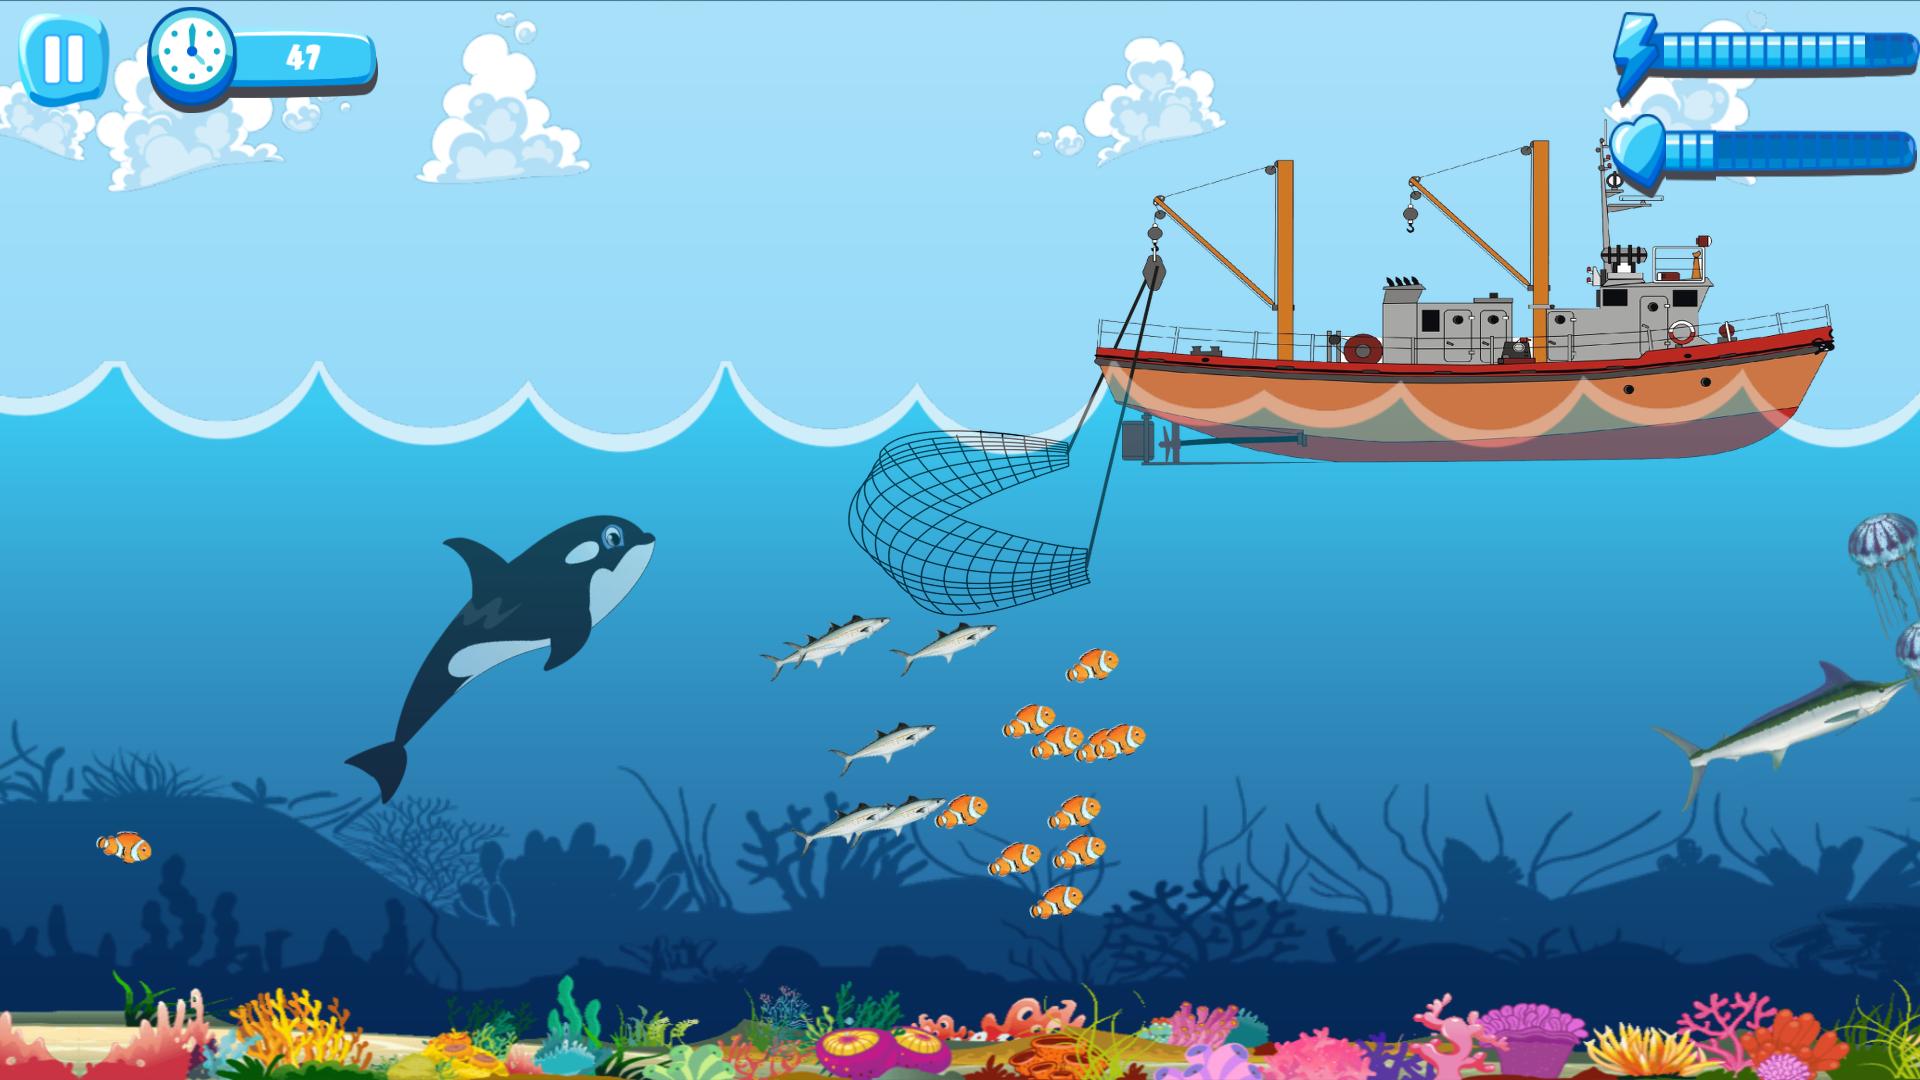 Игры океана 2. Whale game. Whale Tale. Ocean of games.